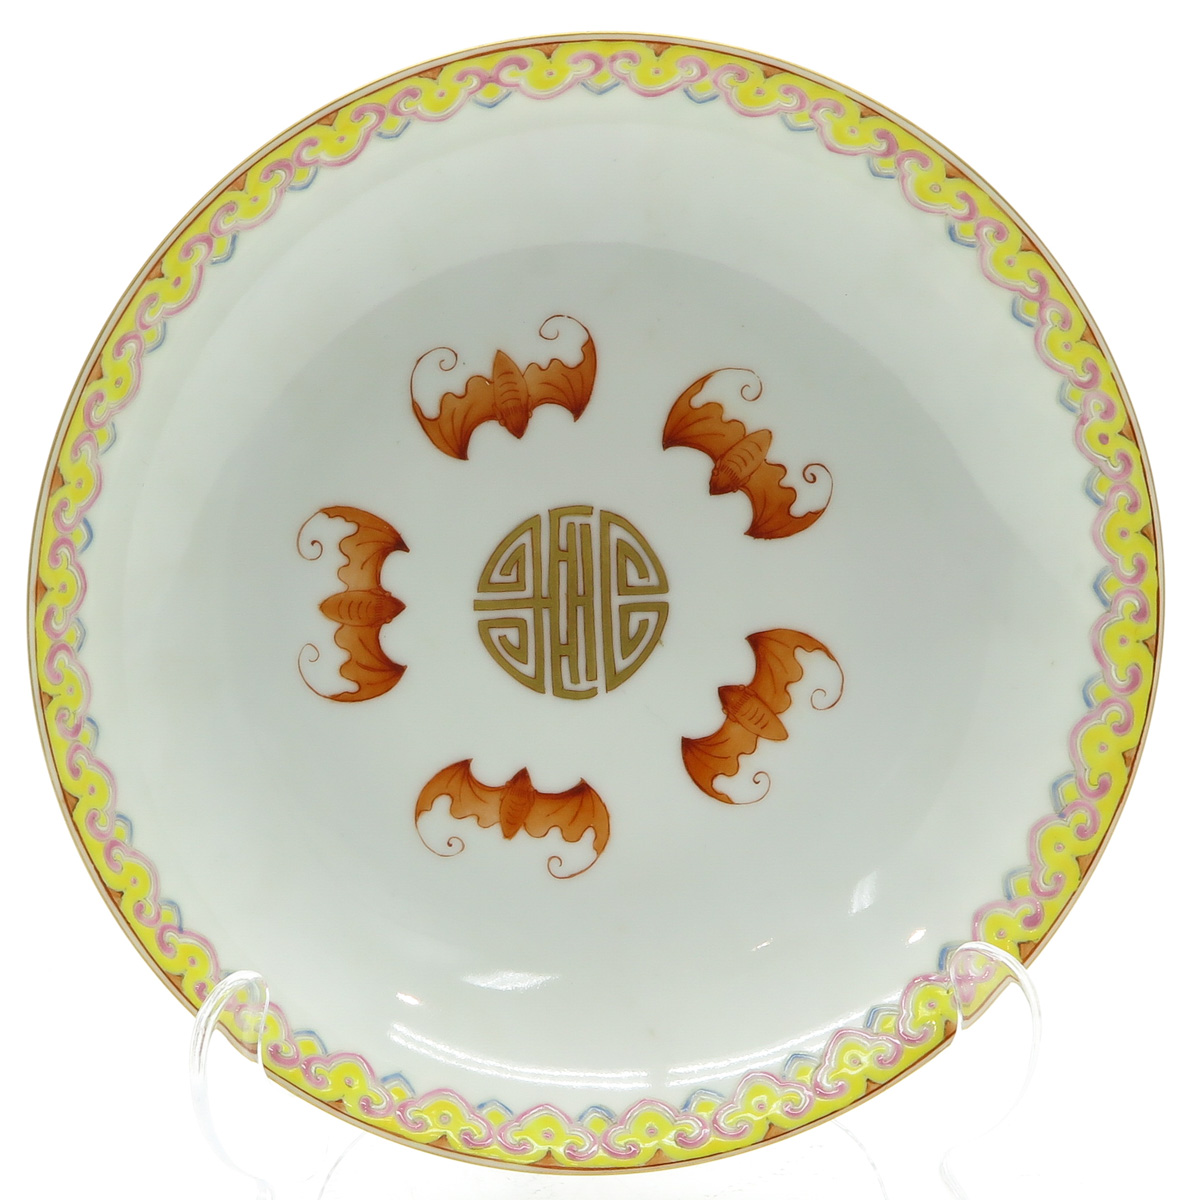 China Porcelain Plate with Decor of Bats